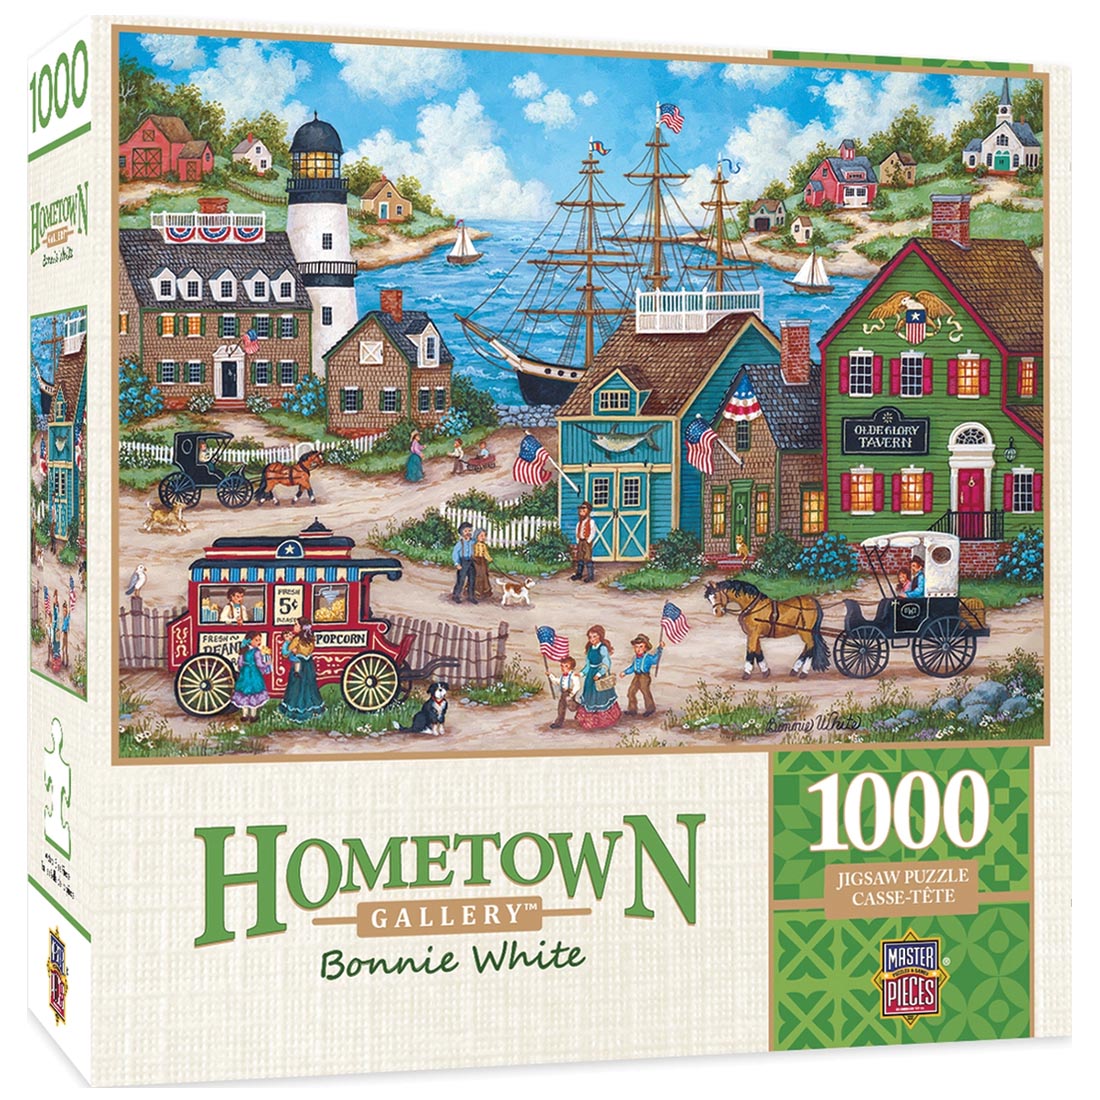 Hometown Gallery Series The Young Patriots 1000-Piece Puzzle by MasterPieces